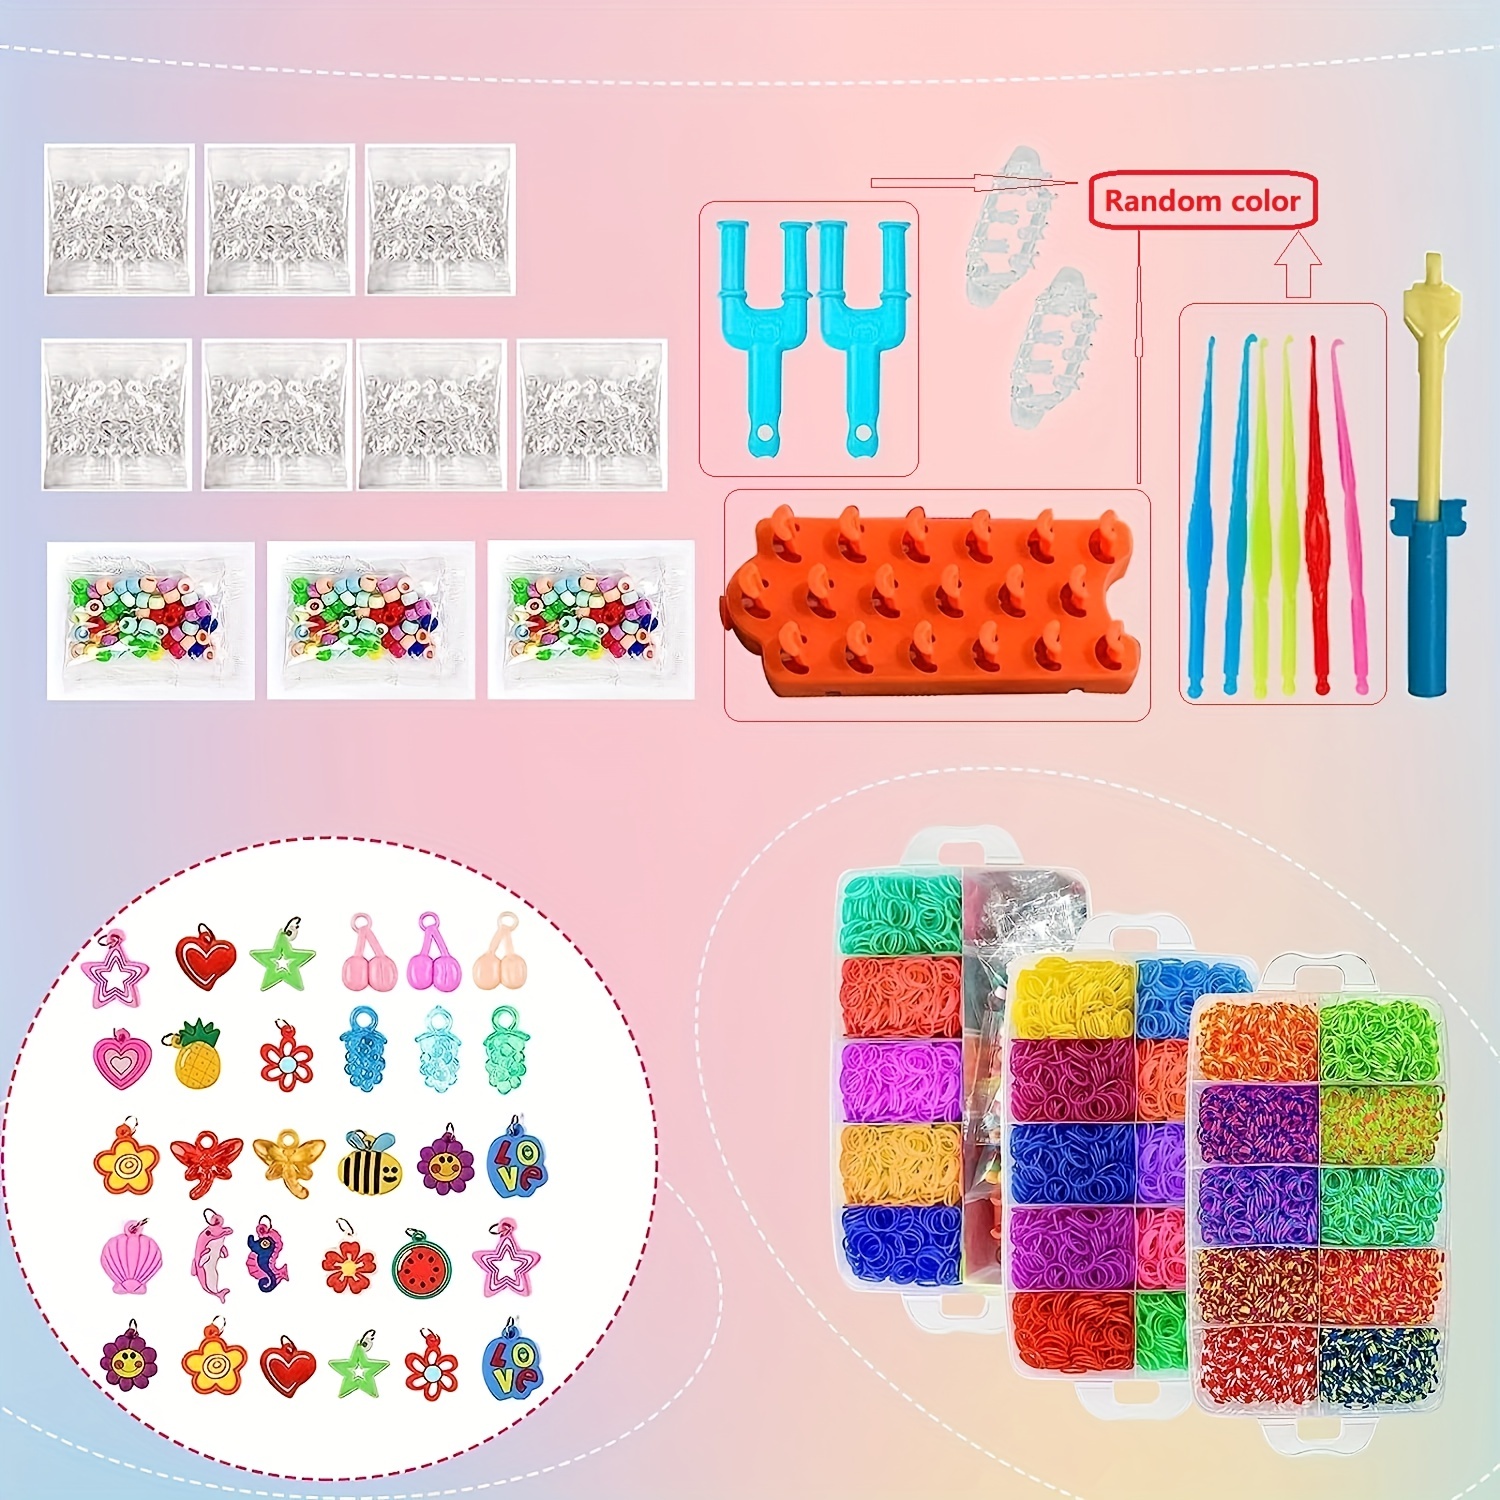 Loom Band Kit, 15000+pcs Loom Rubber Bands In 25 Colors With Storage Box,  DIY Friendship Bracelet Making Kit For Christmas Gifts, Girls Birthday Prese